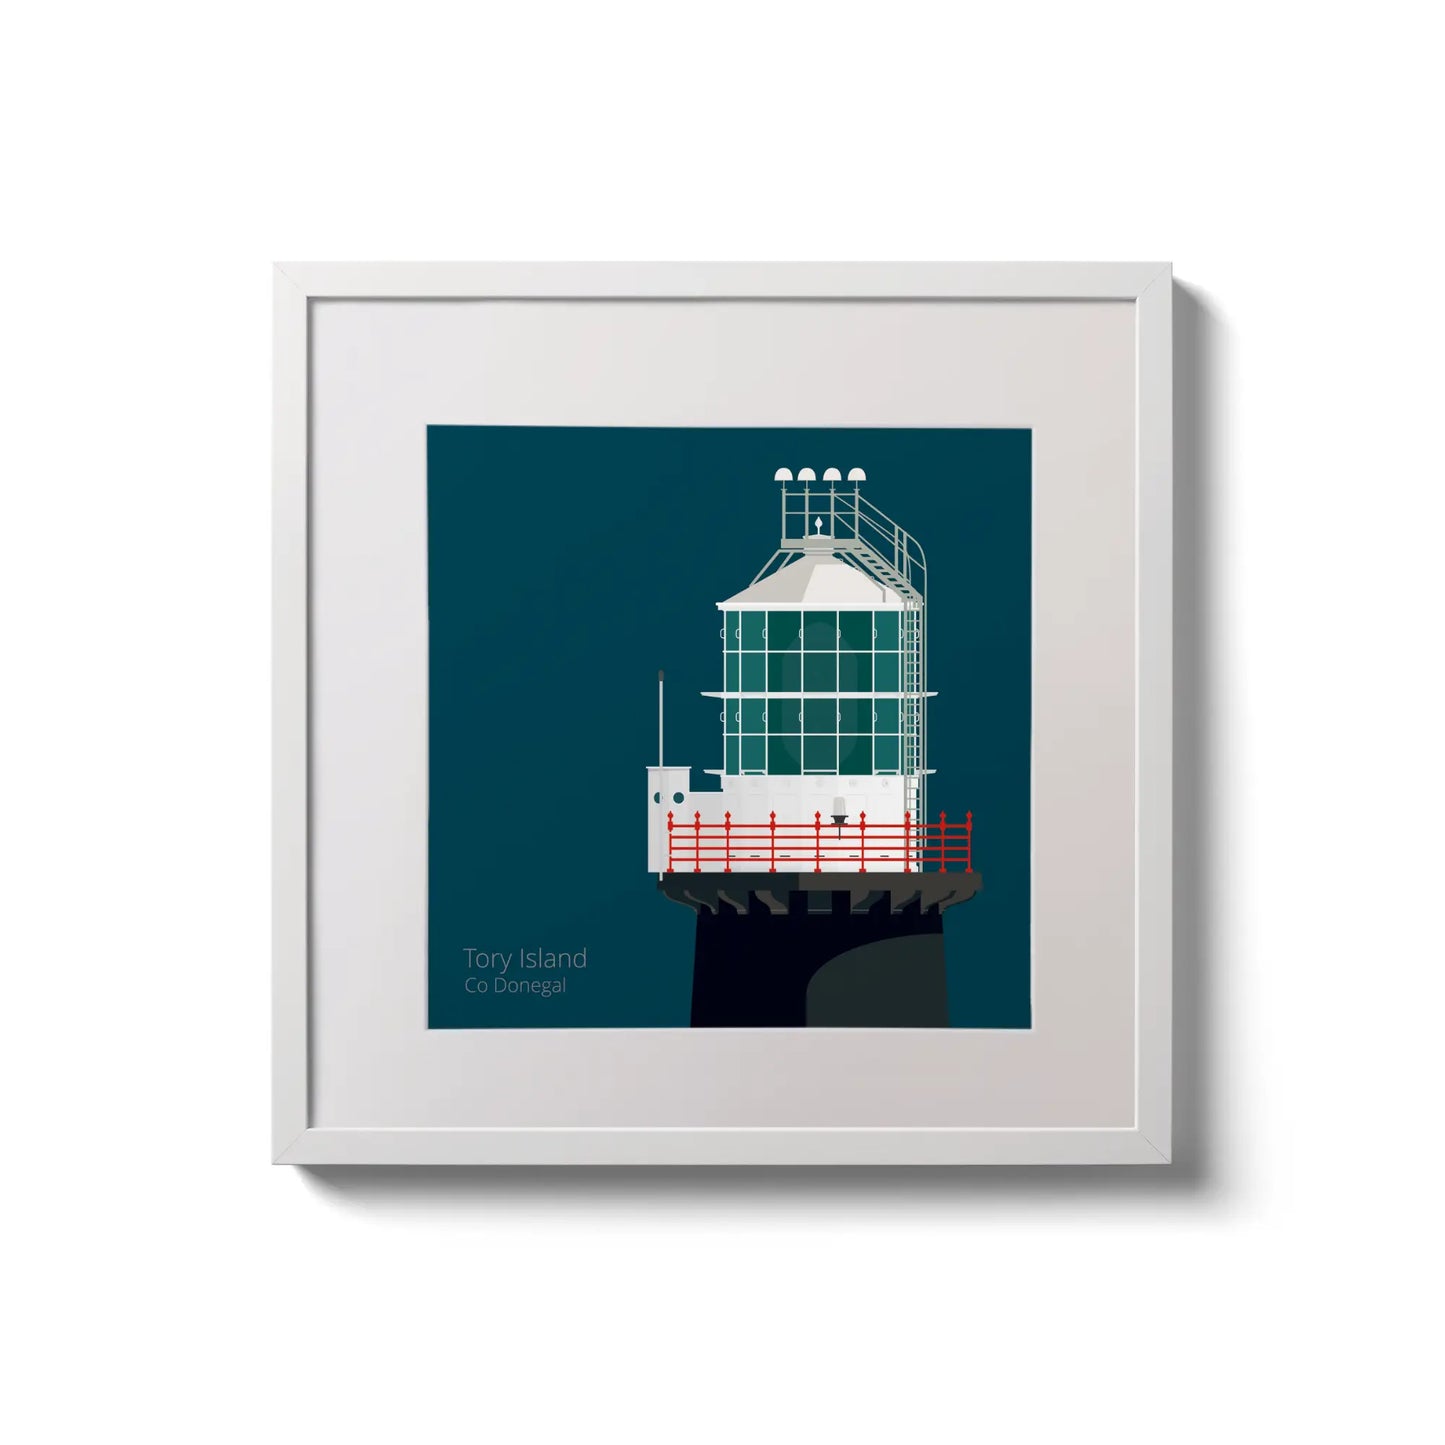 Illustration of Tory Island lighthouse on a midnight blue background,  in a white square frame measuring 20x20cm.